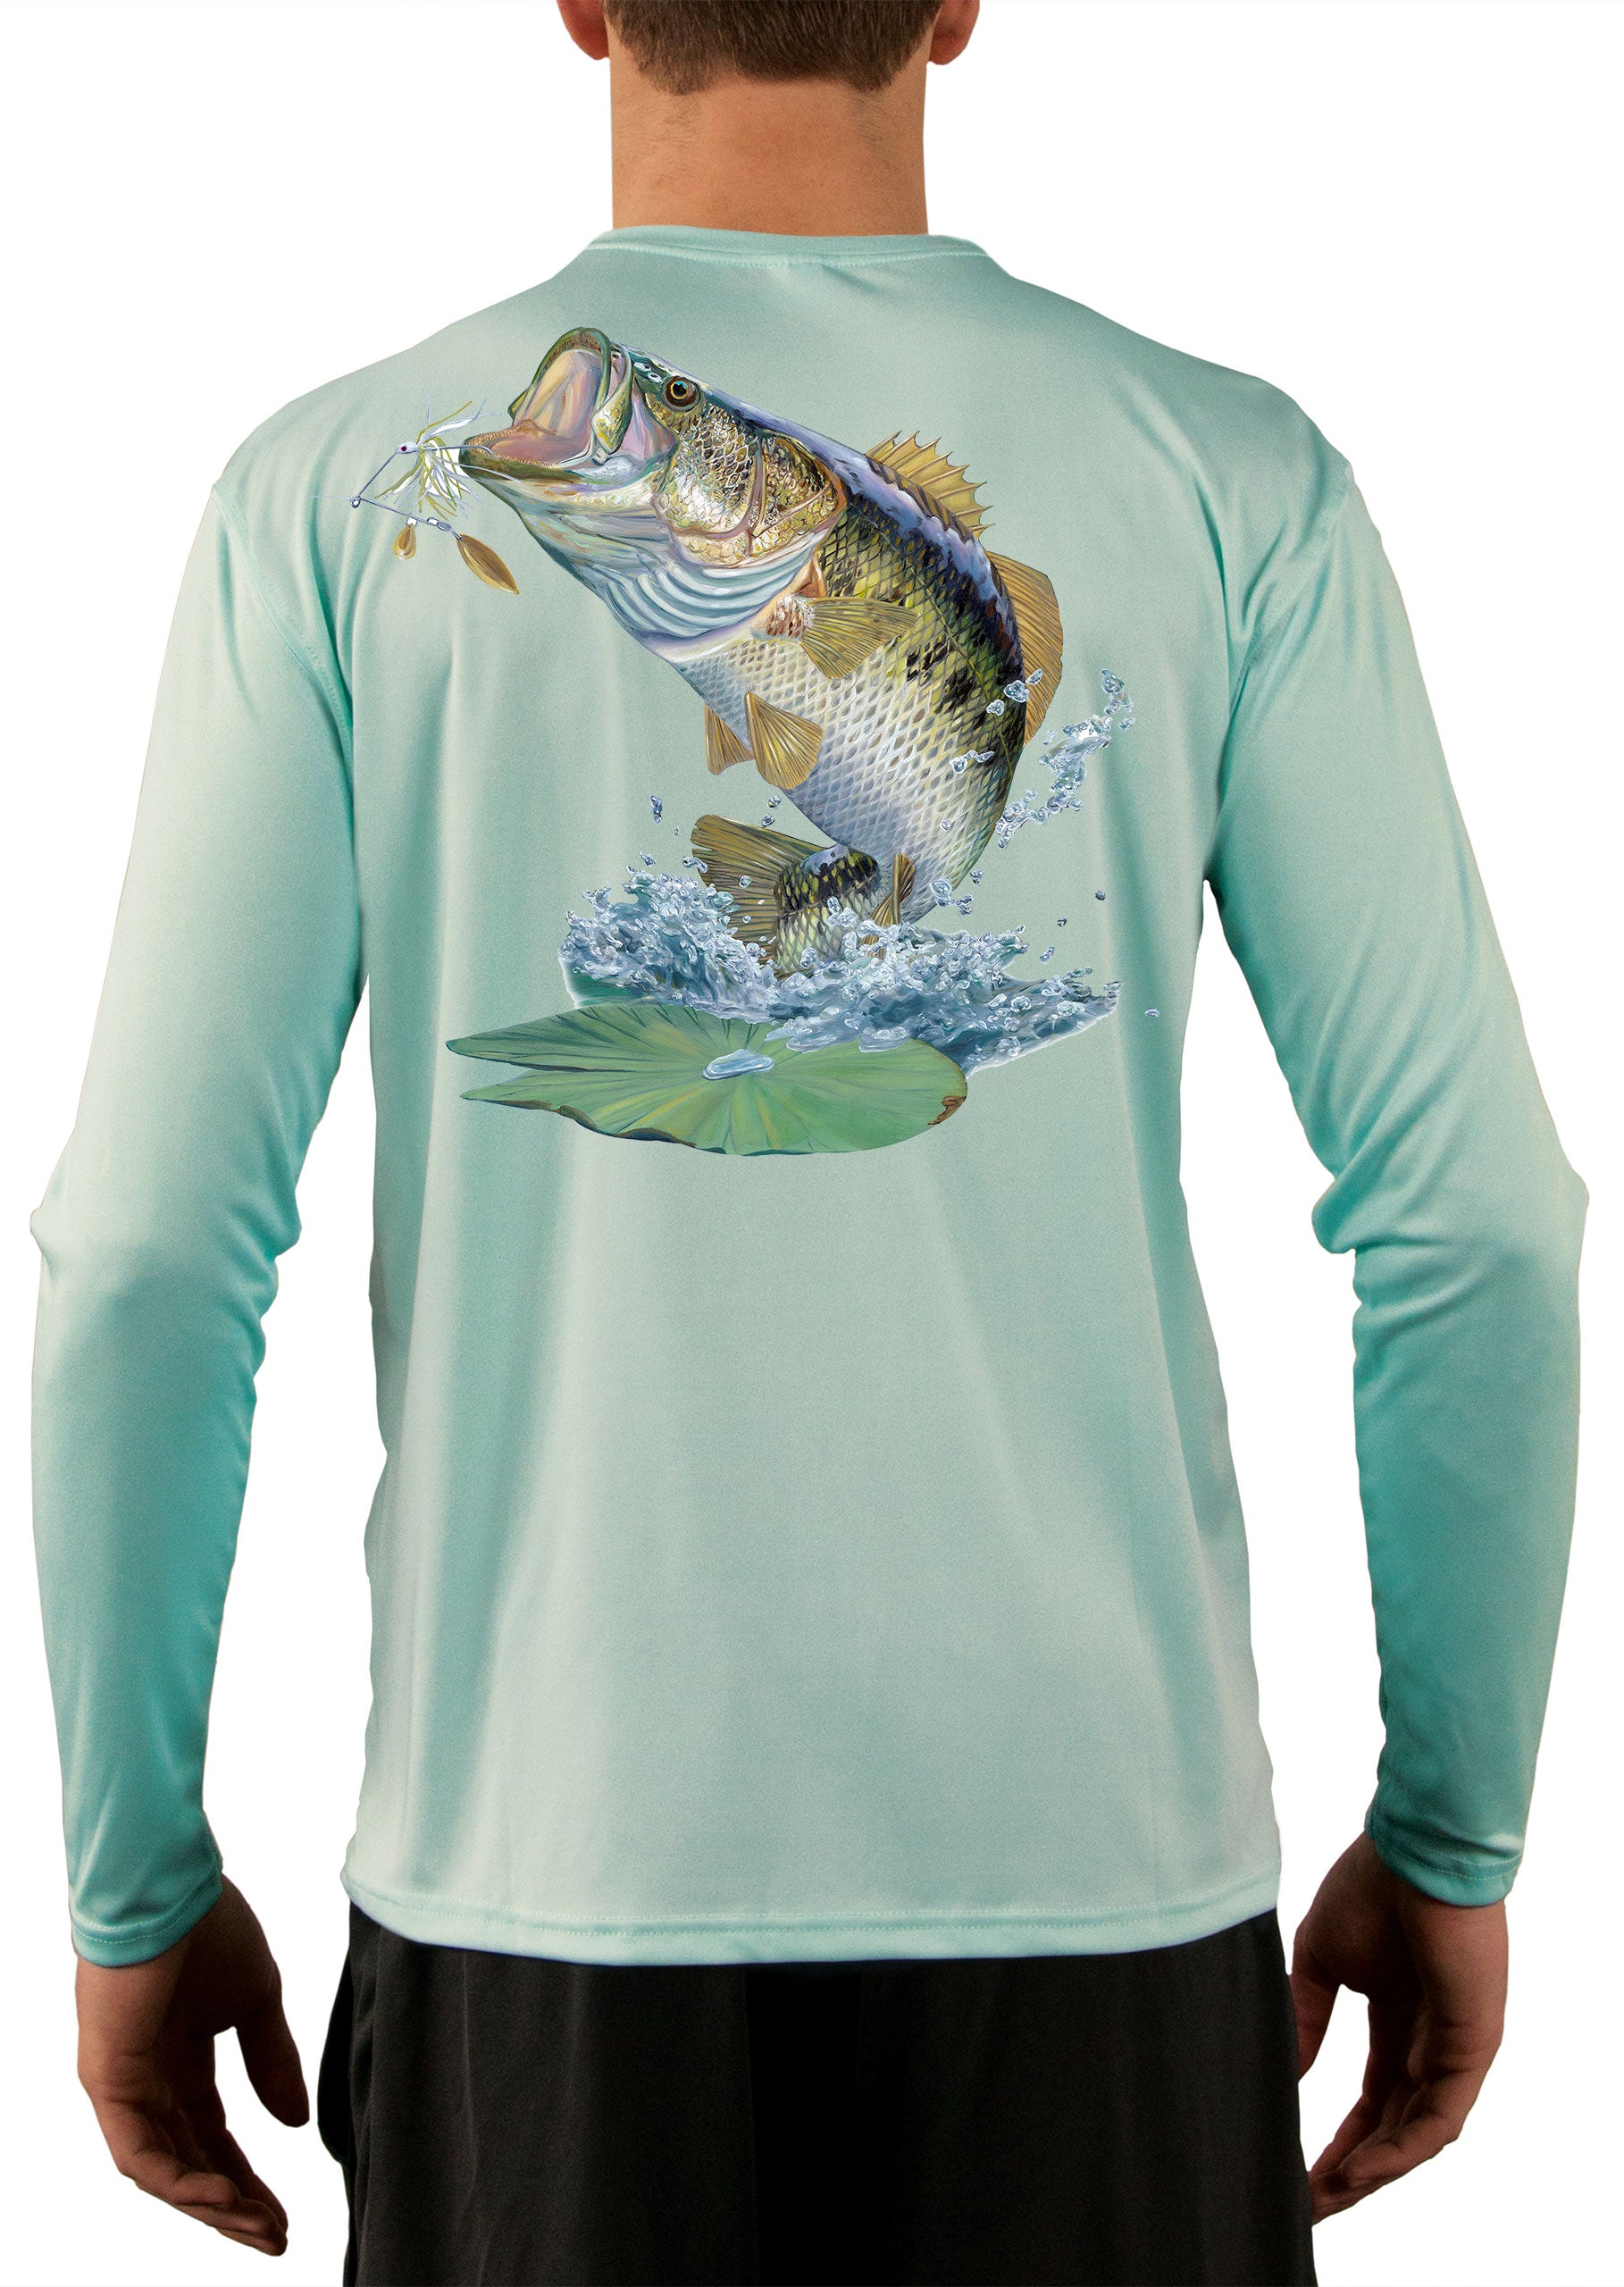 Large Mouth Bass Men's Fishing Shirt Rude Awakening Long Sleeve, Moisture Wicking Fabric, Non-fading Print, 50+ UPF Fabric for UV Protection Seagrass